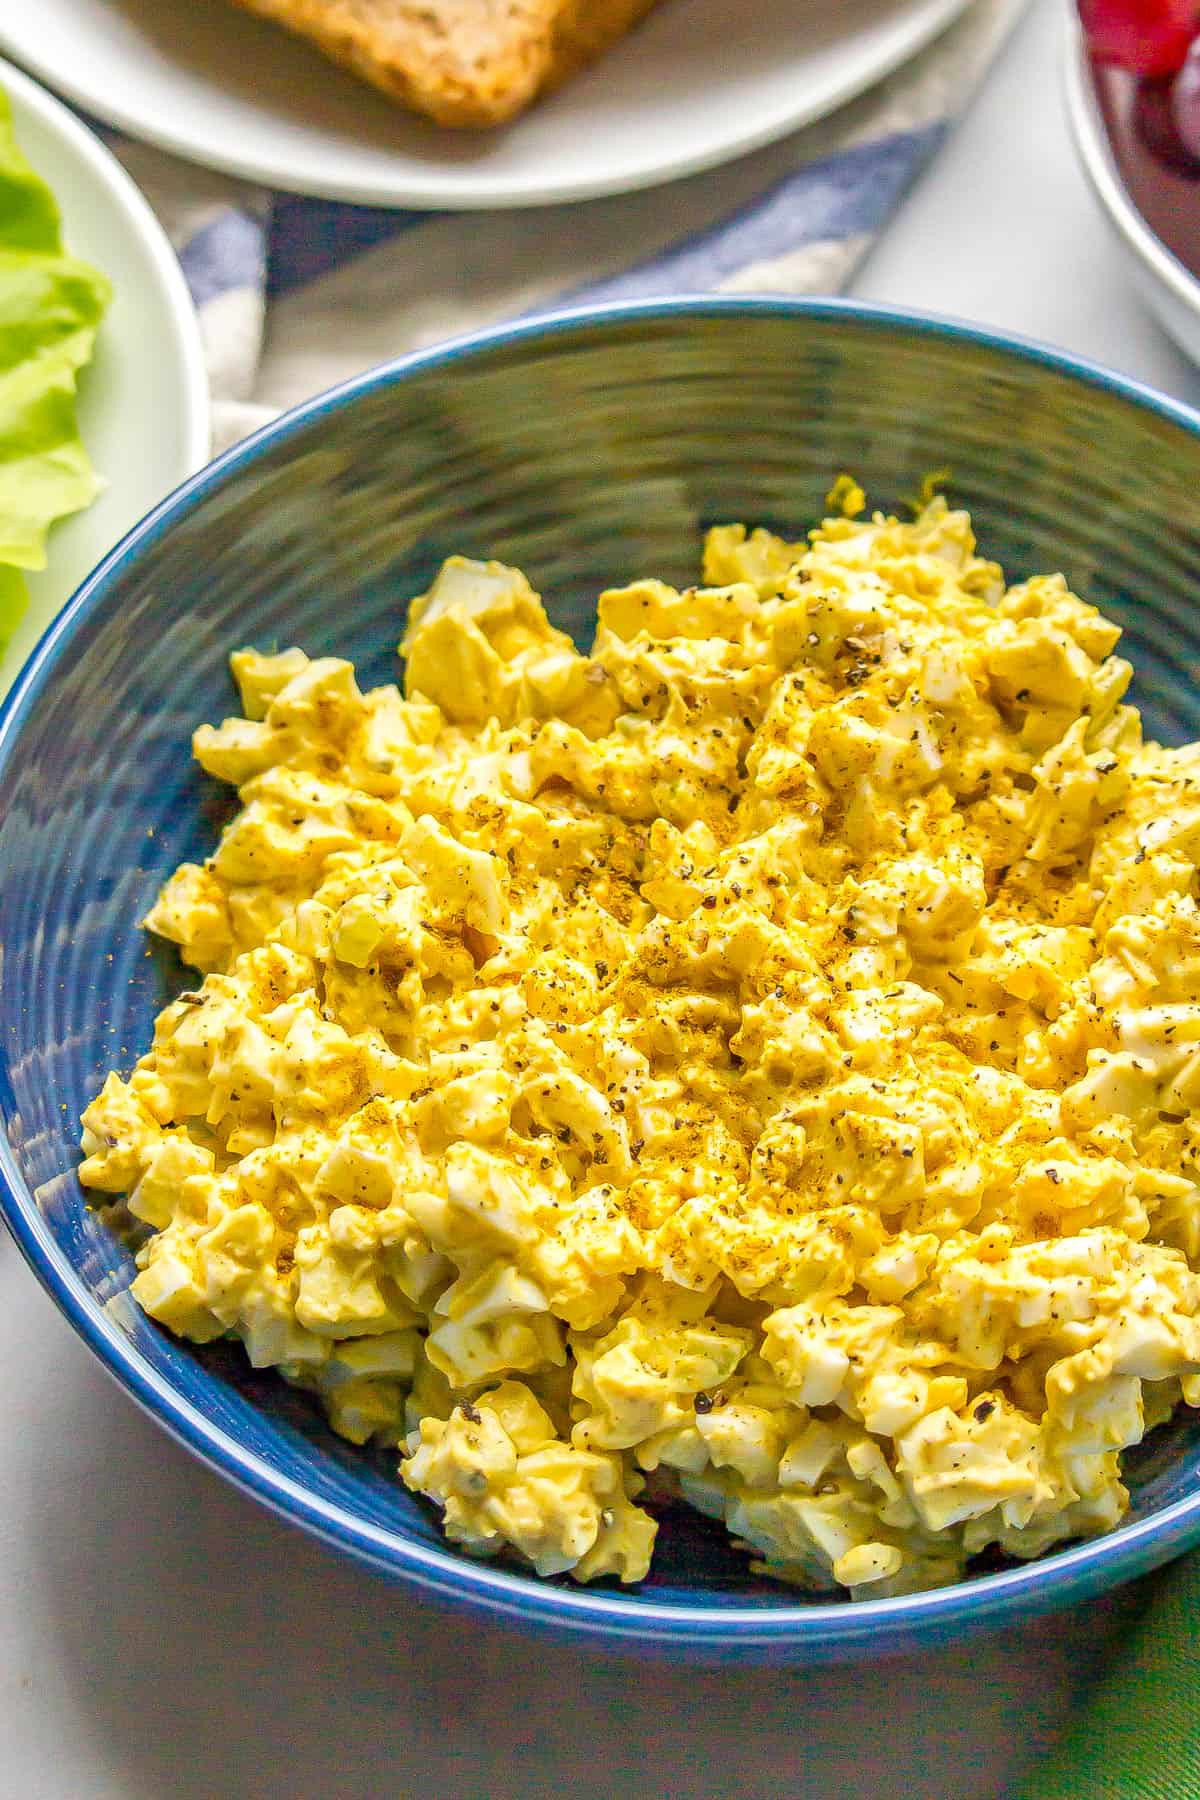 Close up of curried egg salad in a blue bowl.